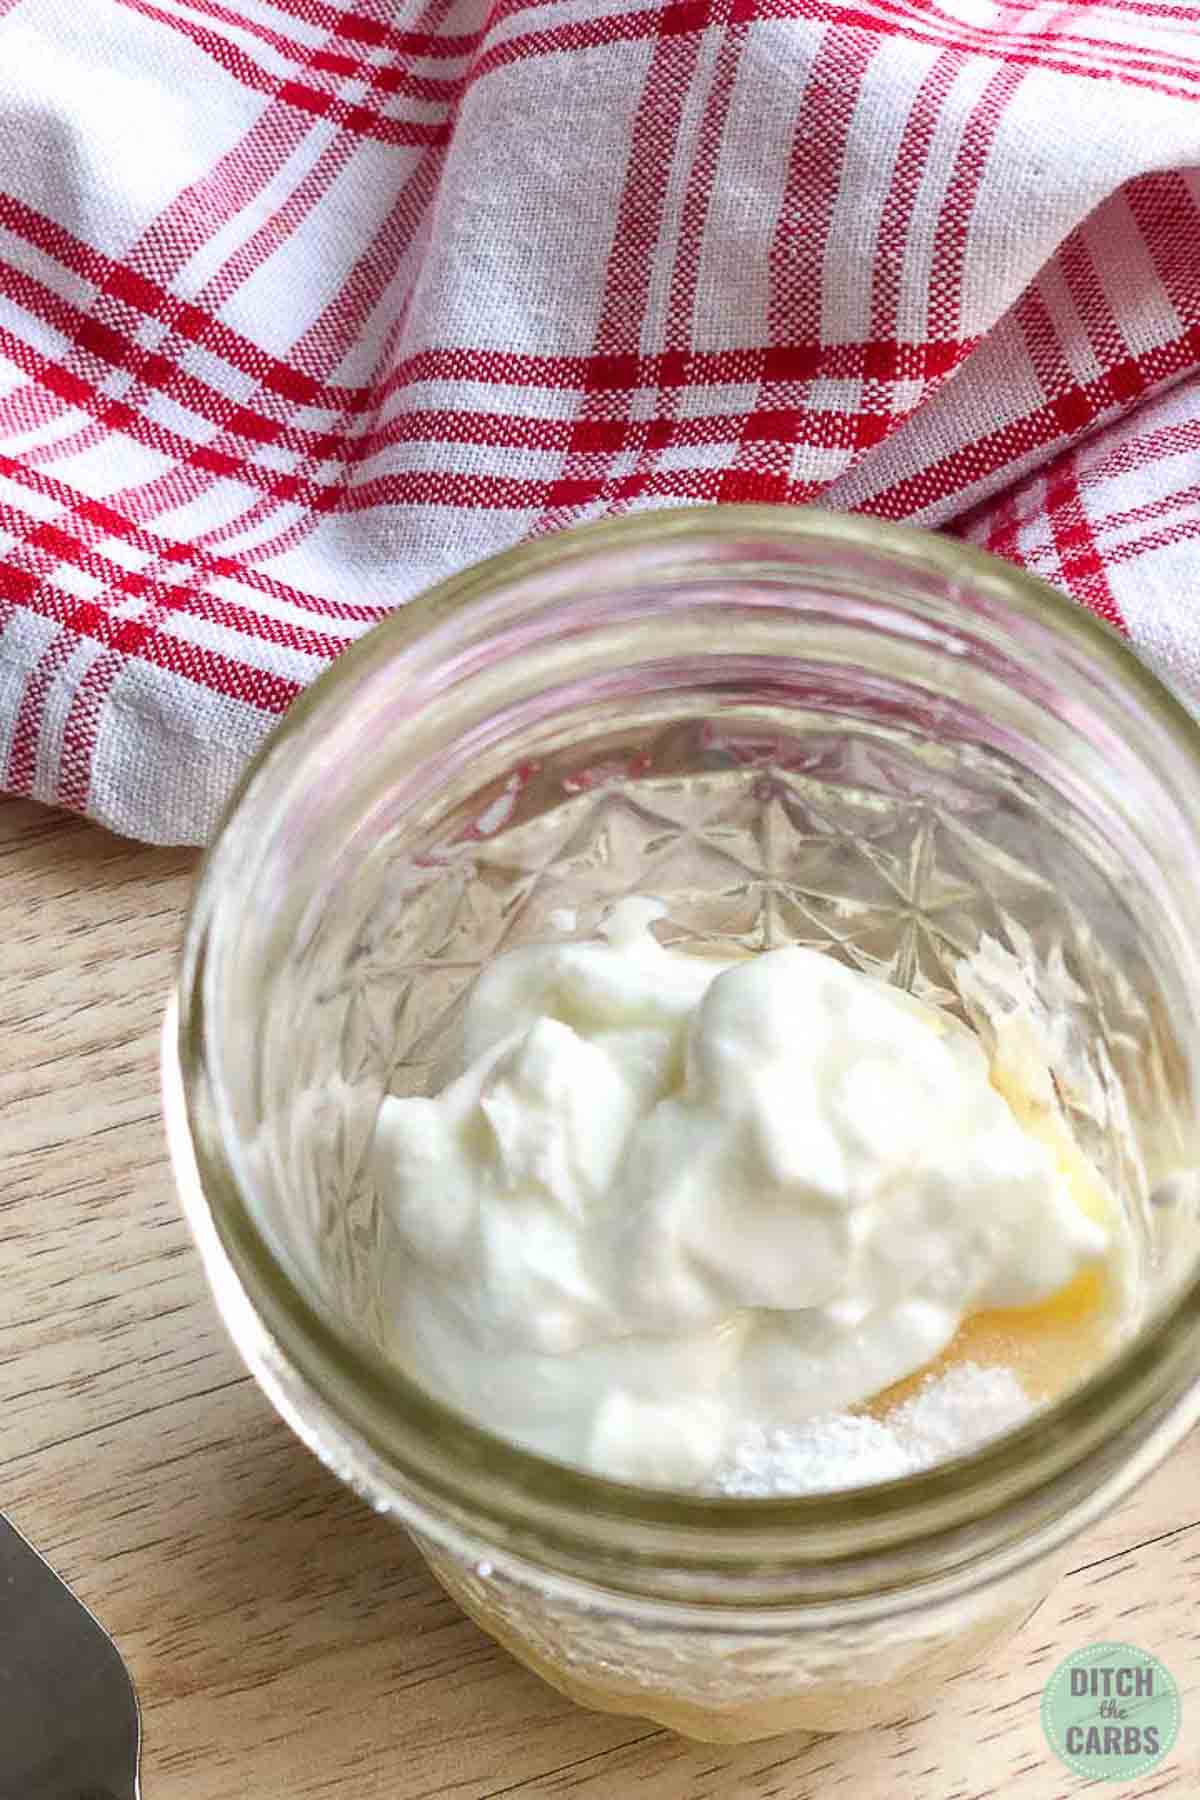 All the keto mug cheesecake ingredients have been added to a clear glass jar. They are ready to be mixed together.